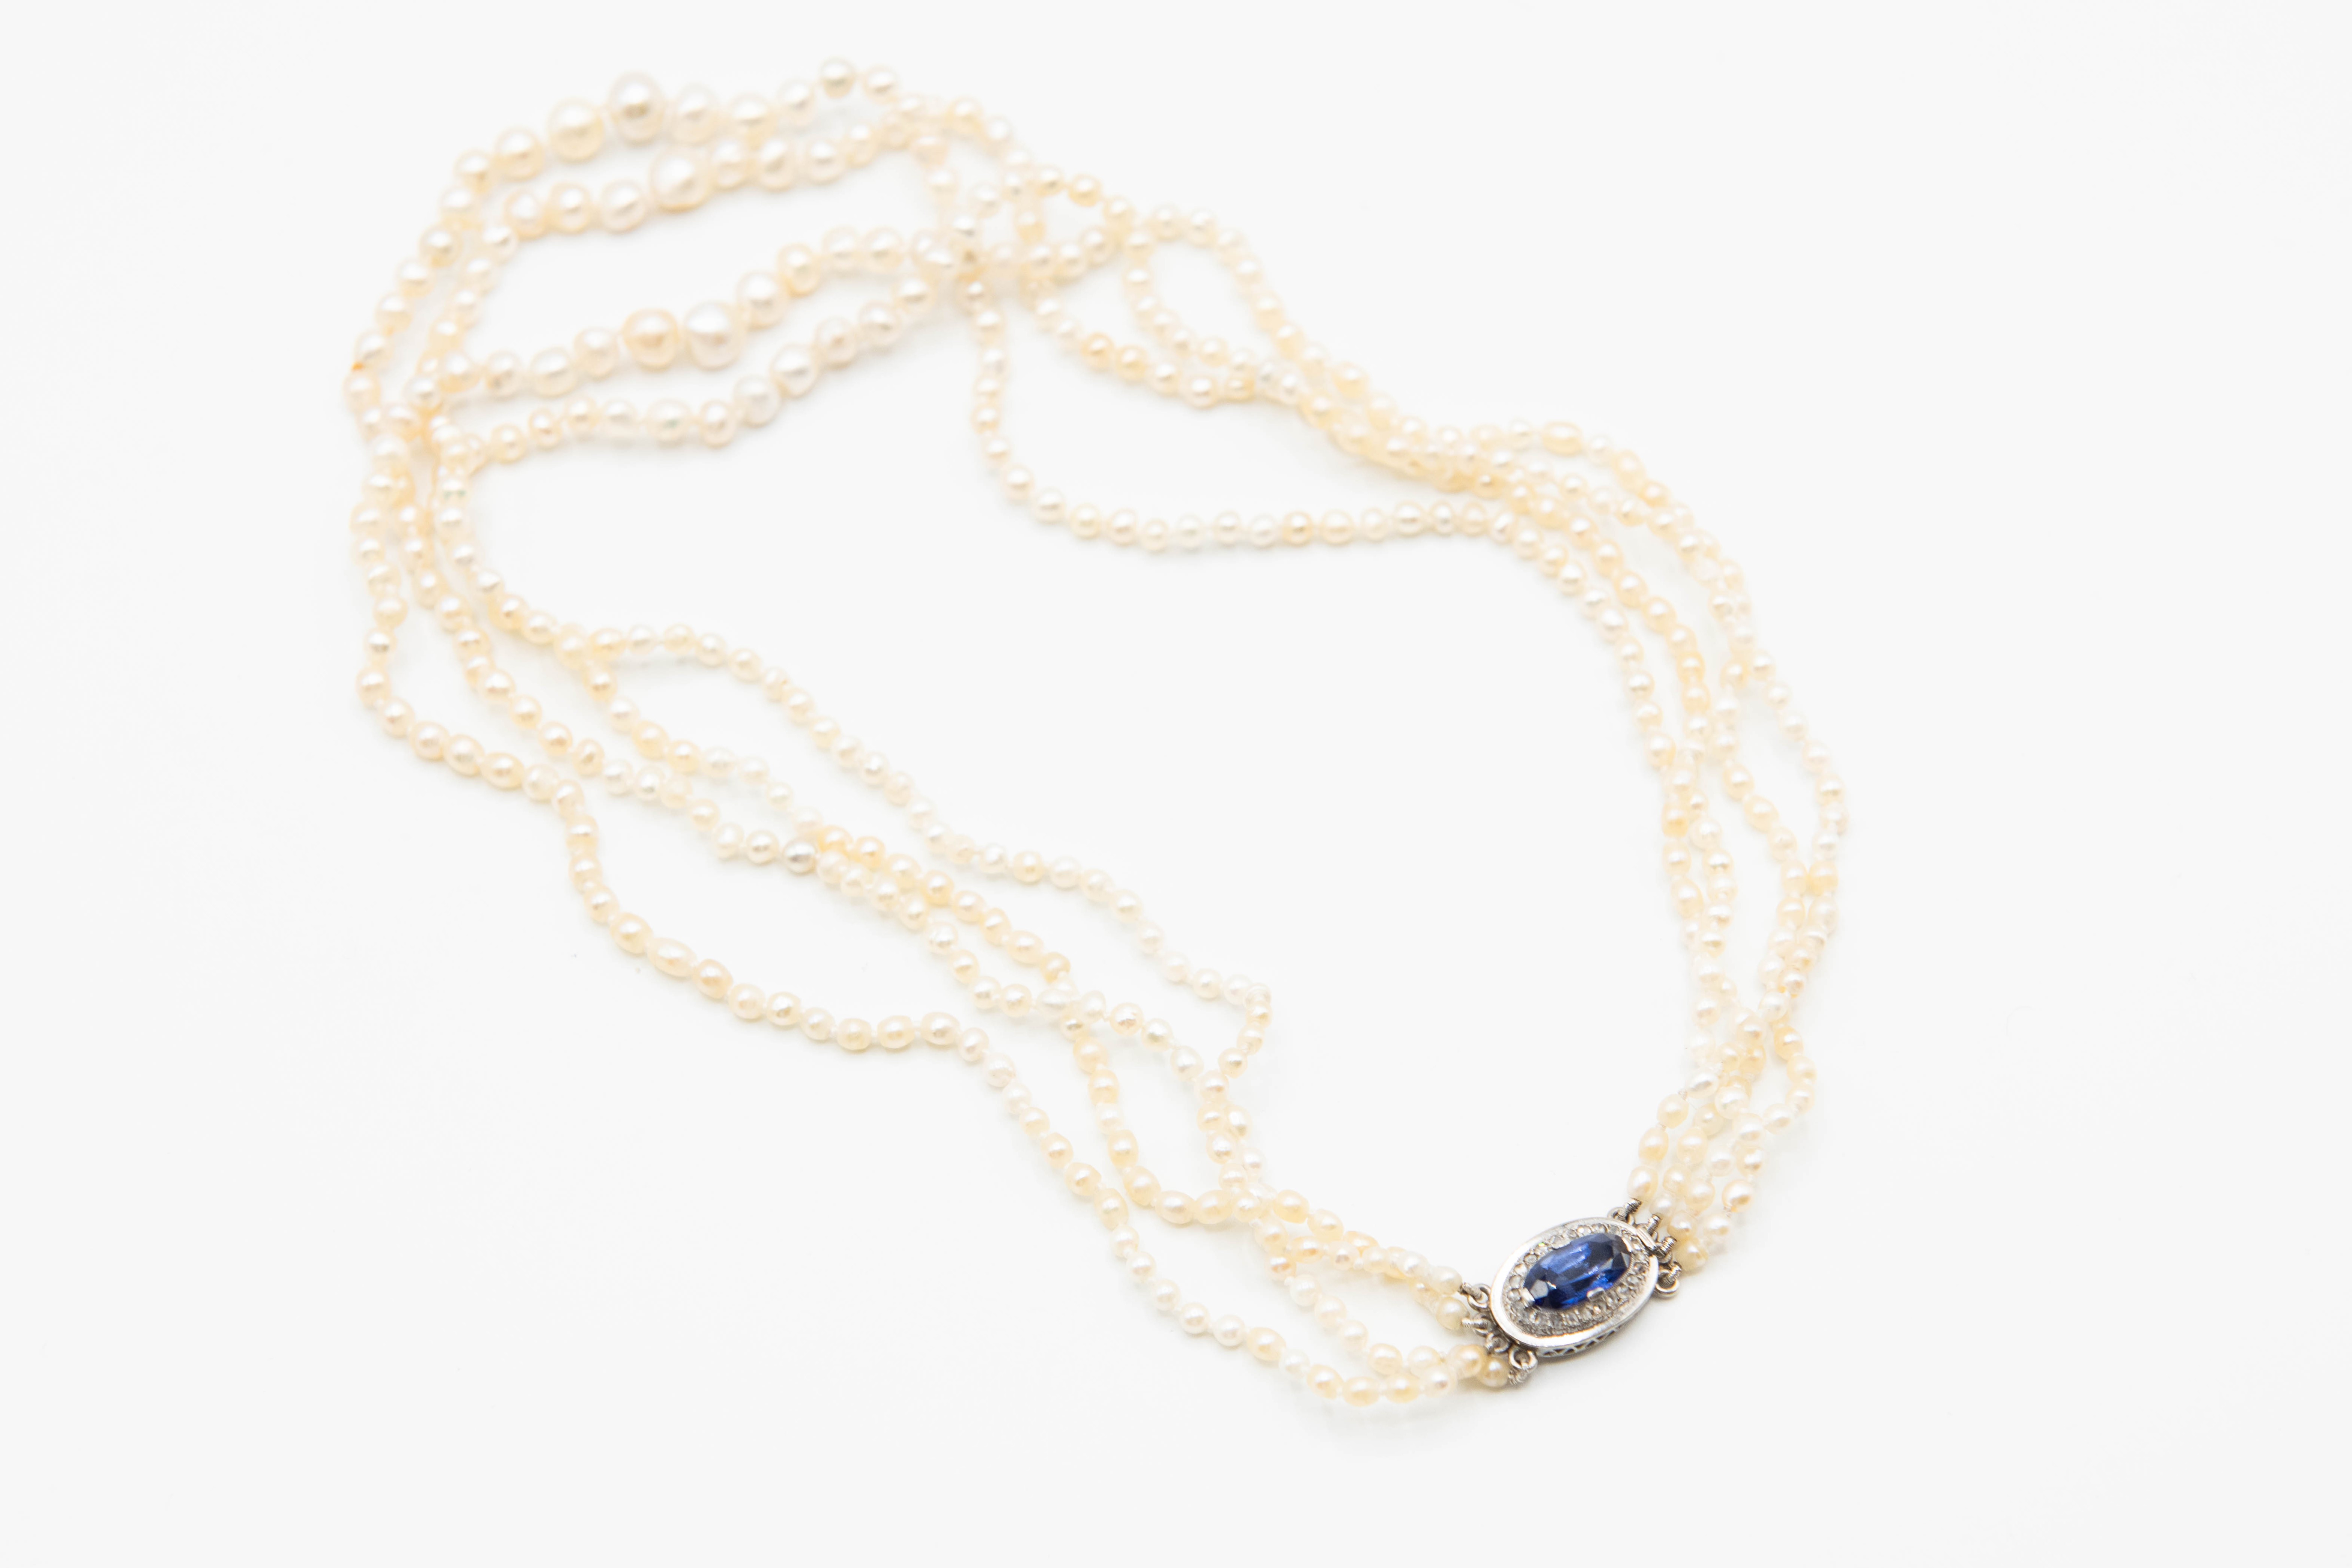 A NATURAL SALTWATER PEARL NECKLACE